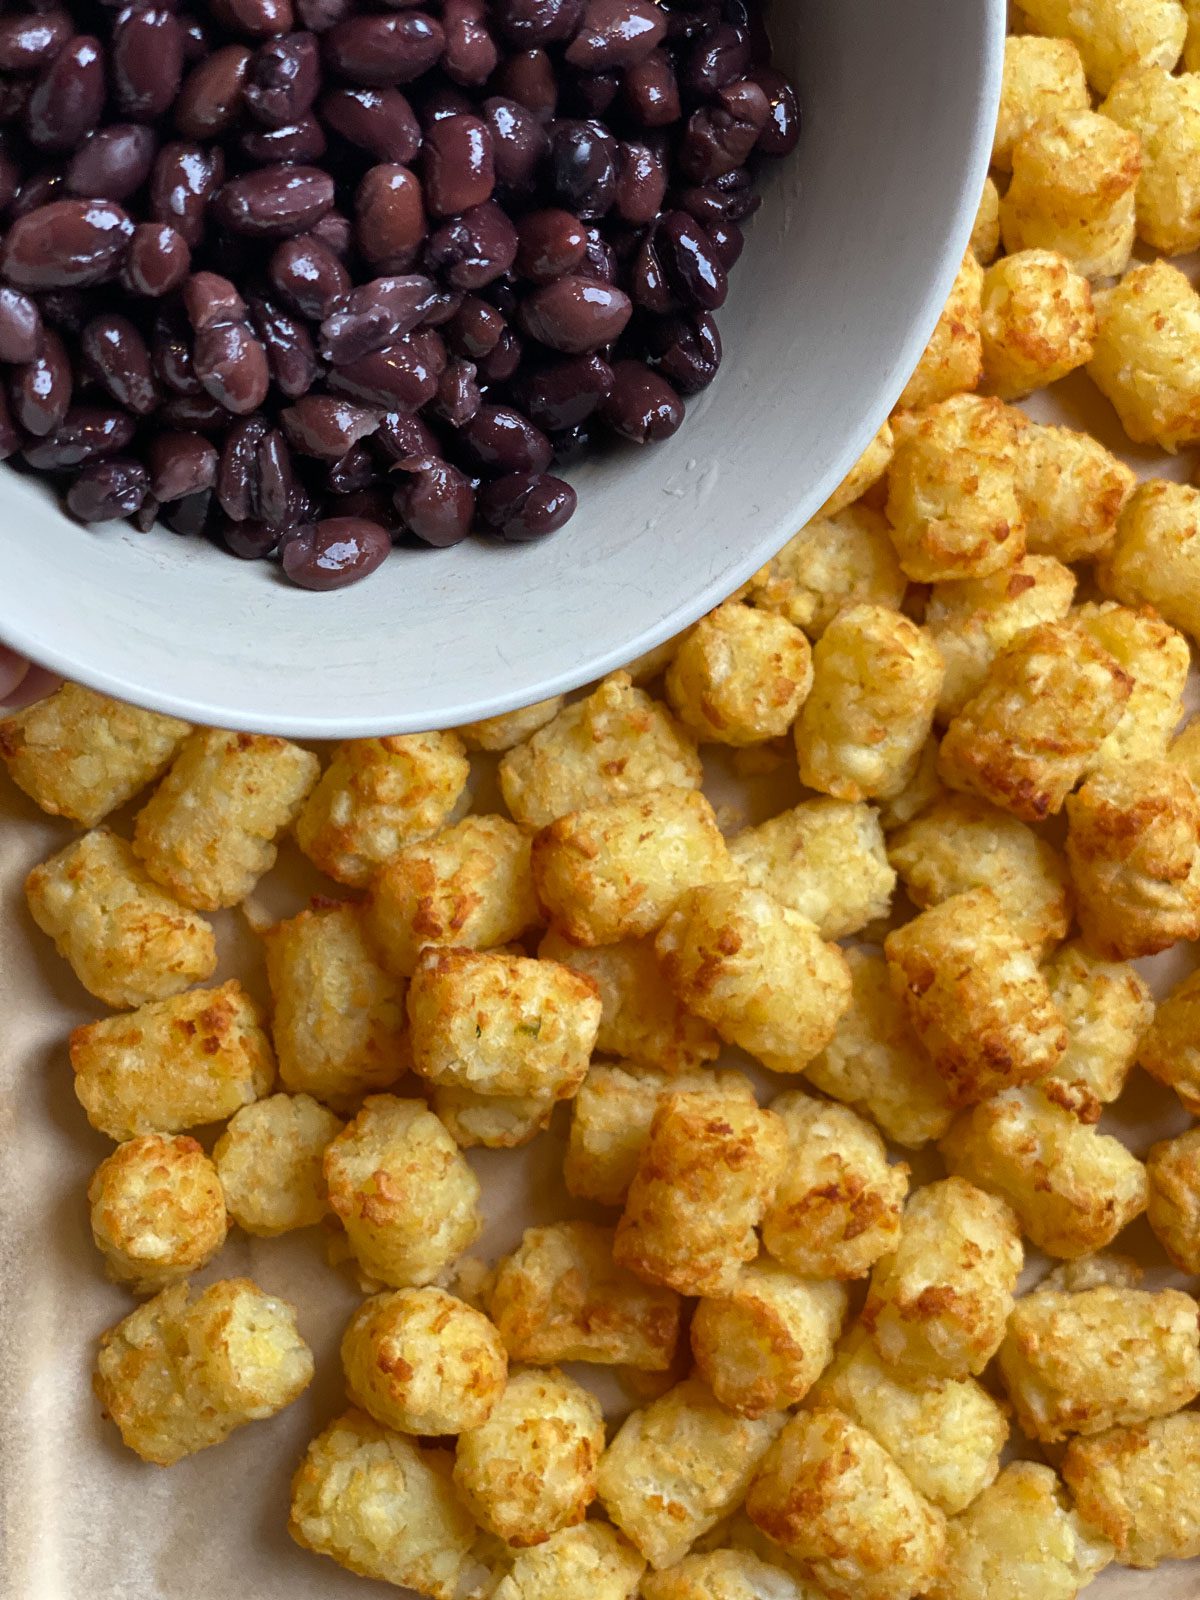 process of adding beans to tater tots